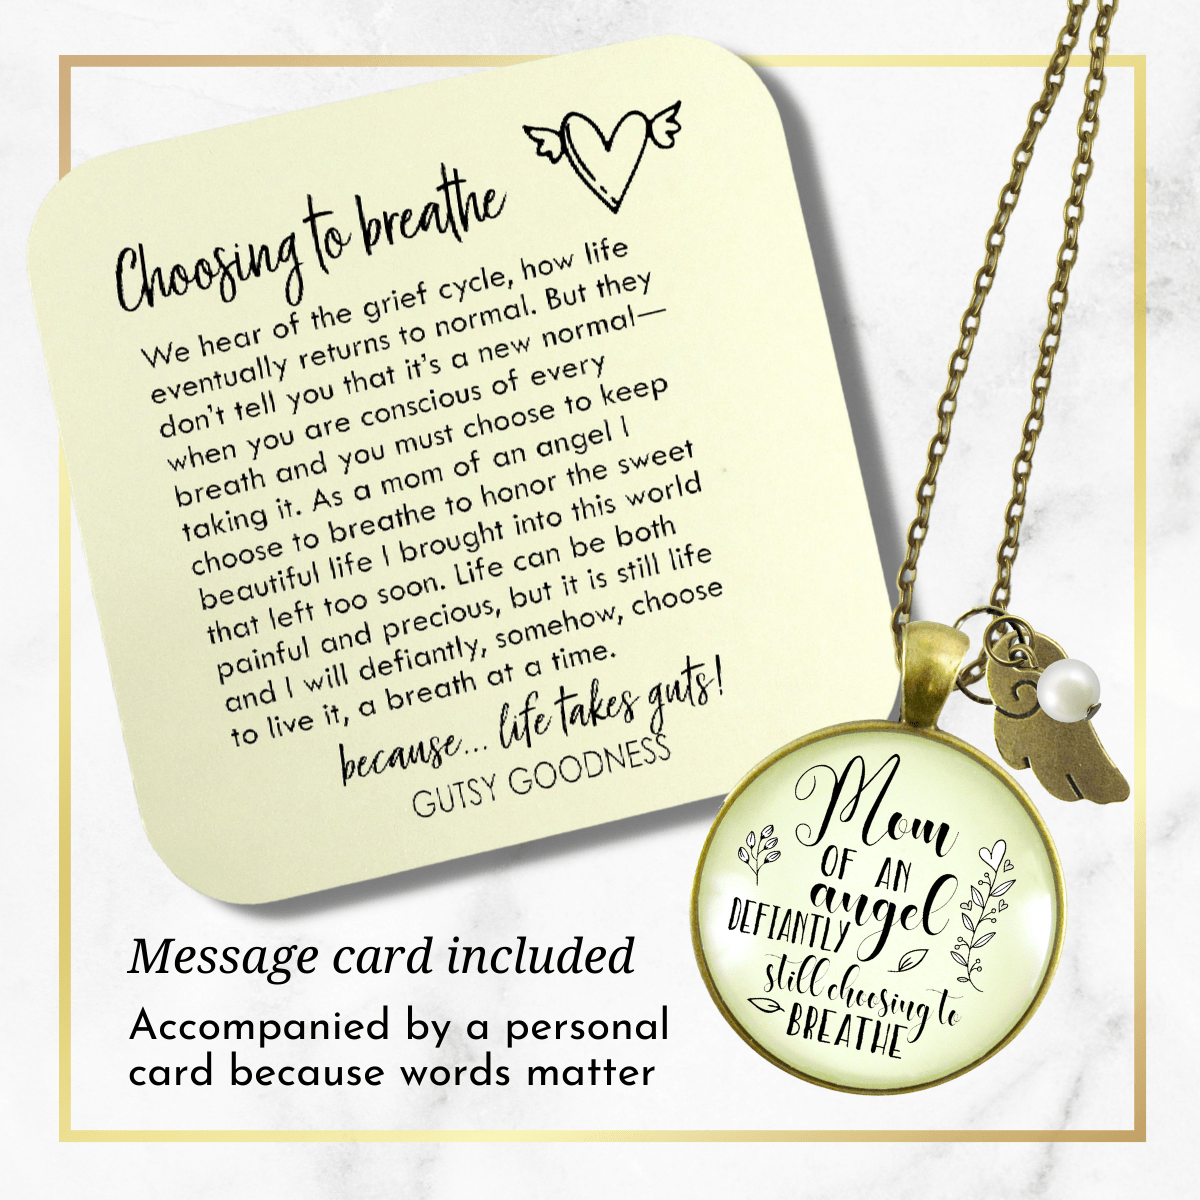 Baby Memorial Necklace Mom Of Angel To Breathe Miscarry Loss Sympathy Jewelry Gift - Gutsy Goodness Handmade Jewelry;Baby Memorial Necklace Mom Of Angel To Breathe Miscarry Loss Sympathy Jewelry Gift - Gutsy Goodness Handmade Jewelry Gifts